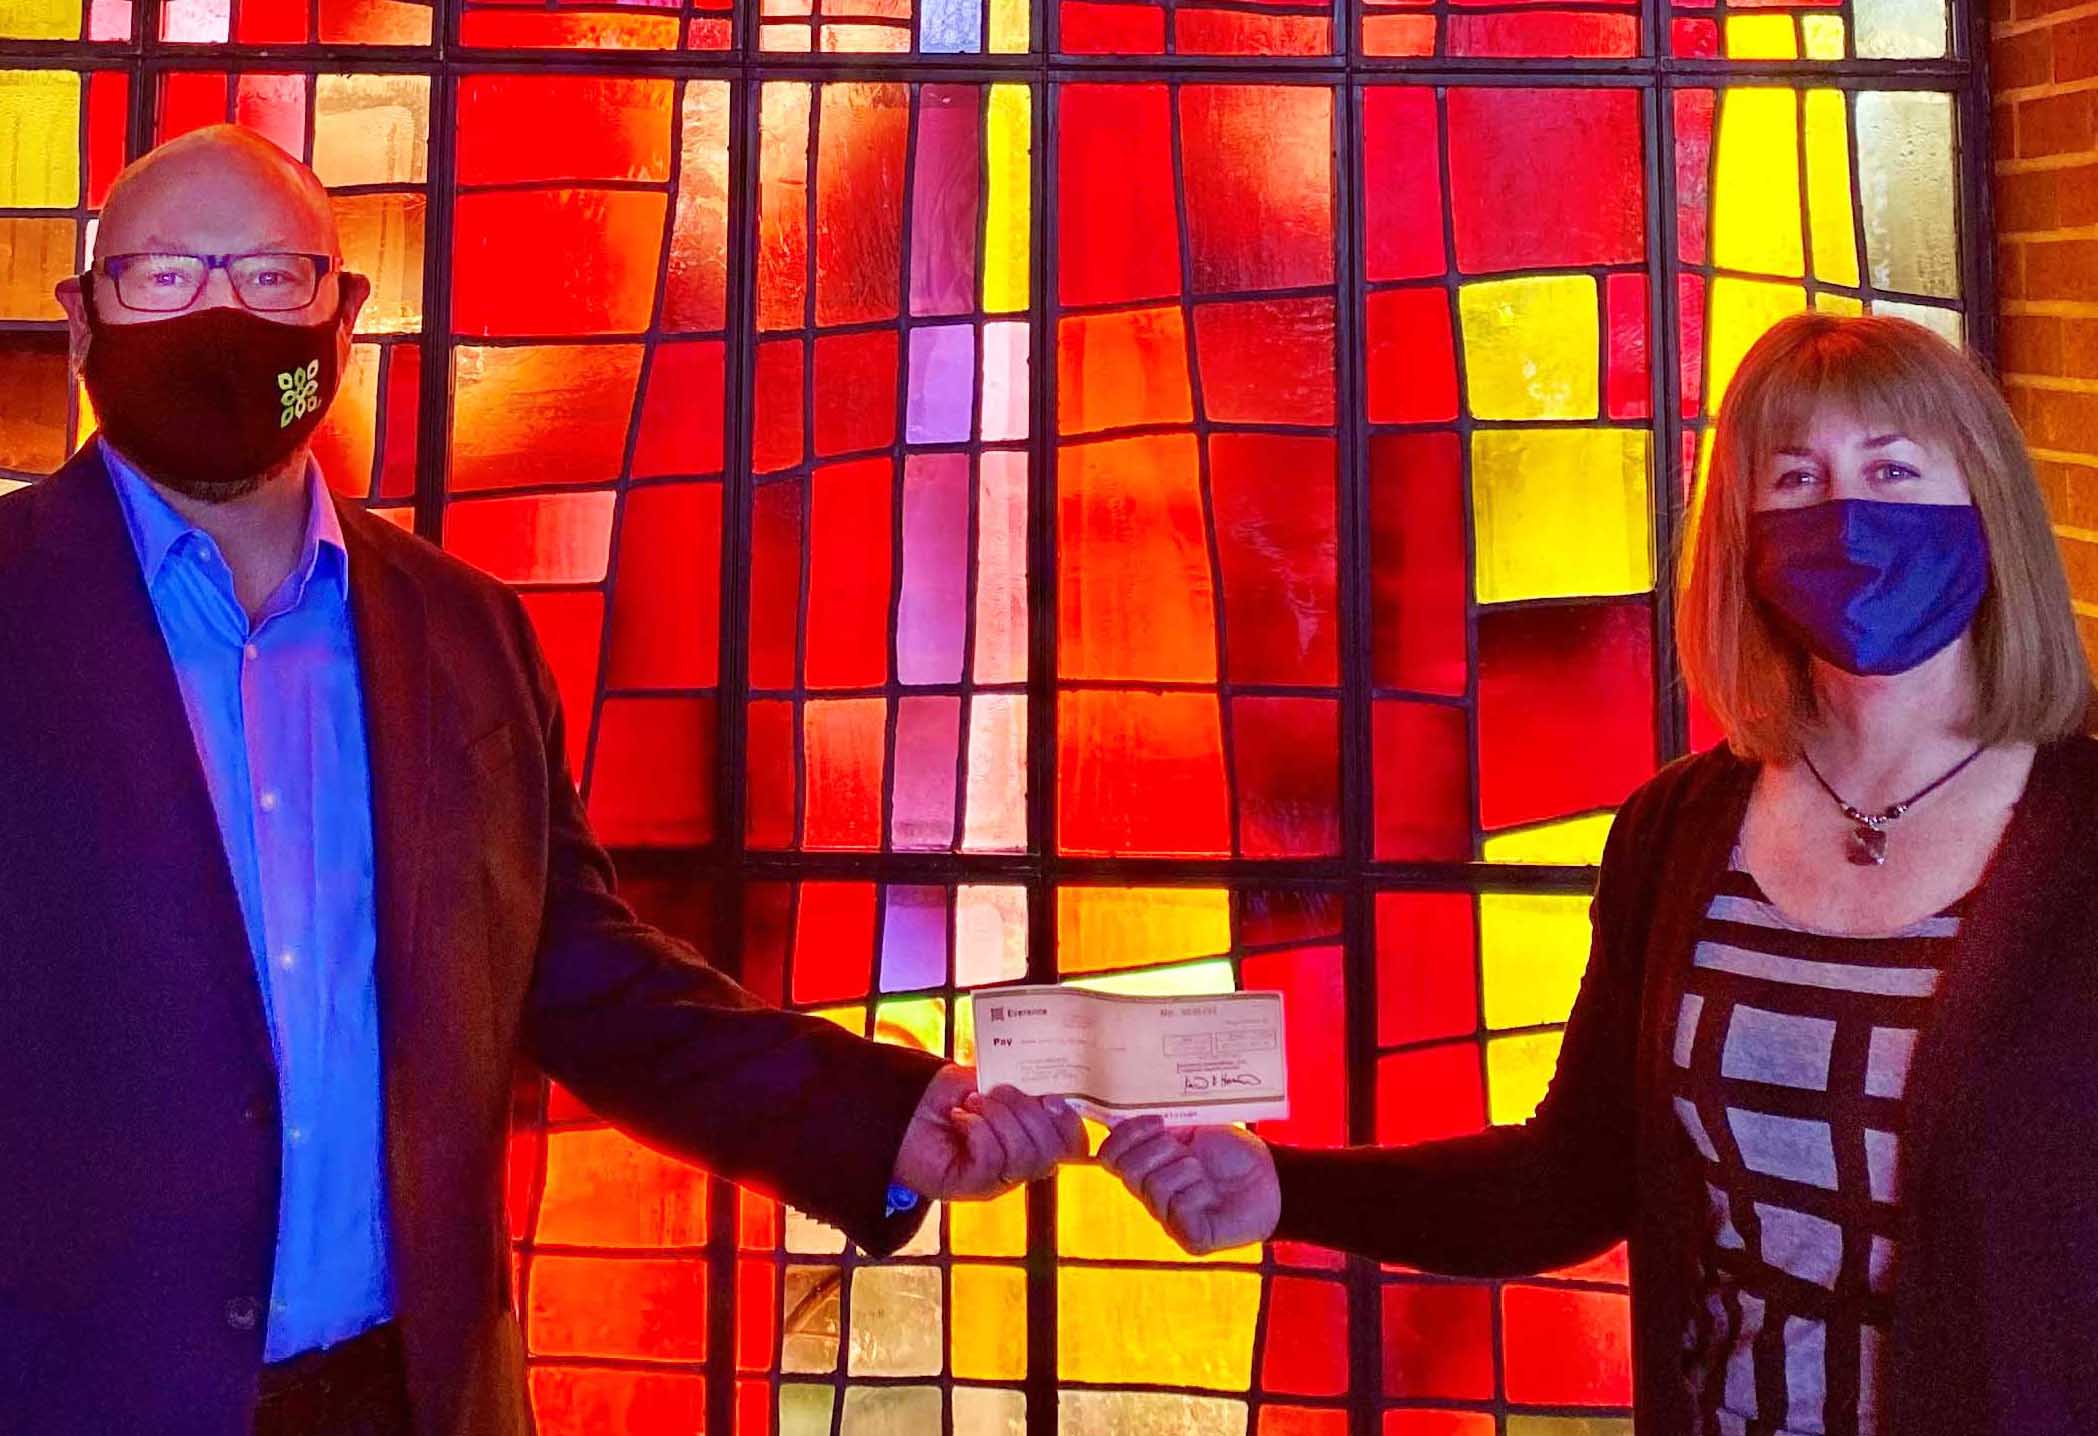 Everence Stewardship Consultant Randy Nyce with Everence mask presents a check to Donna Halteman with blue mask, founder and coordinator of the Bean Bag Food Program in front of stained glass window with red 